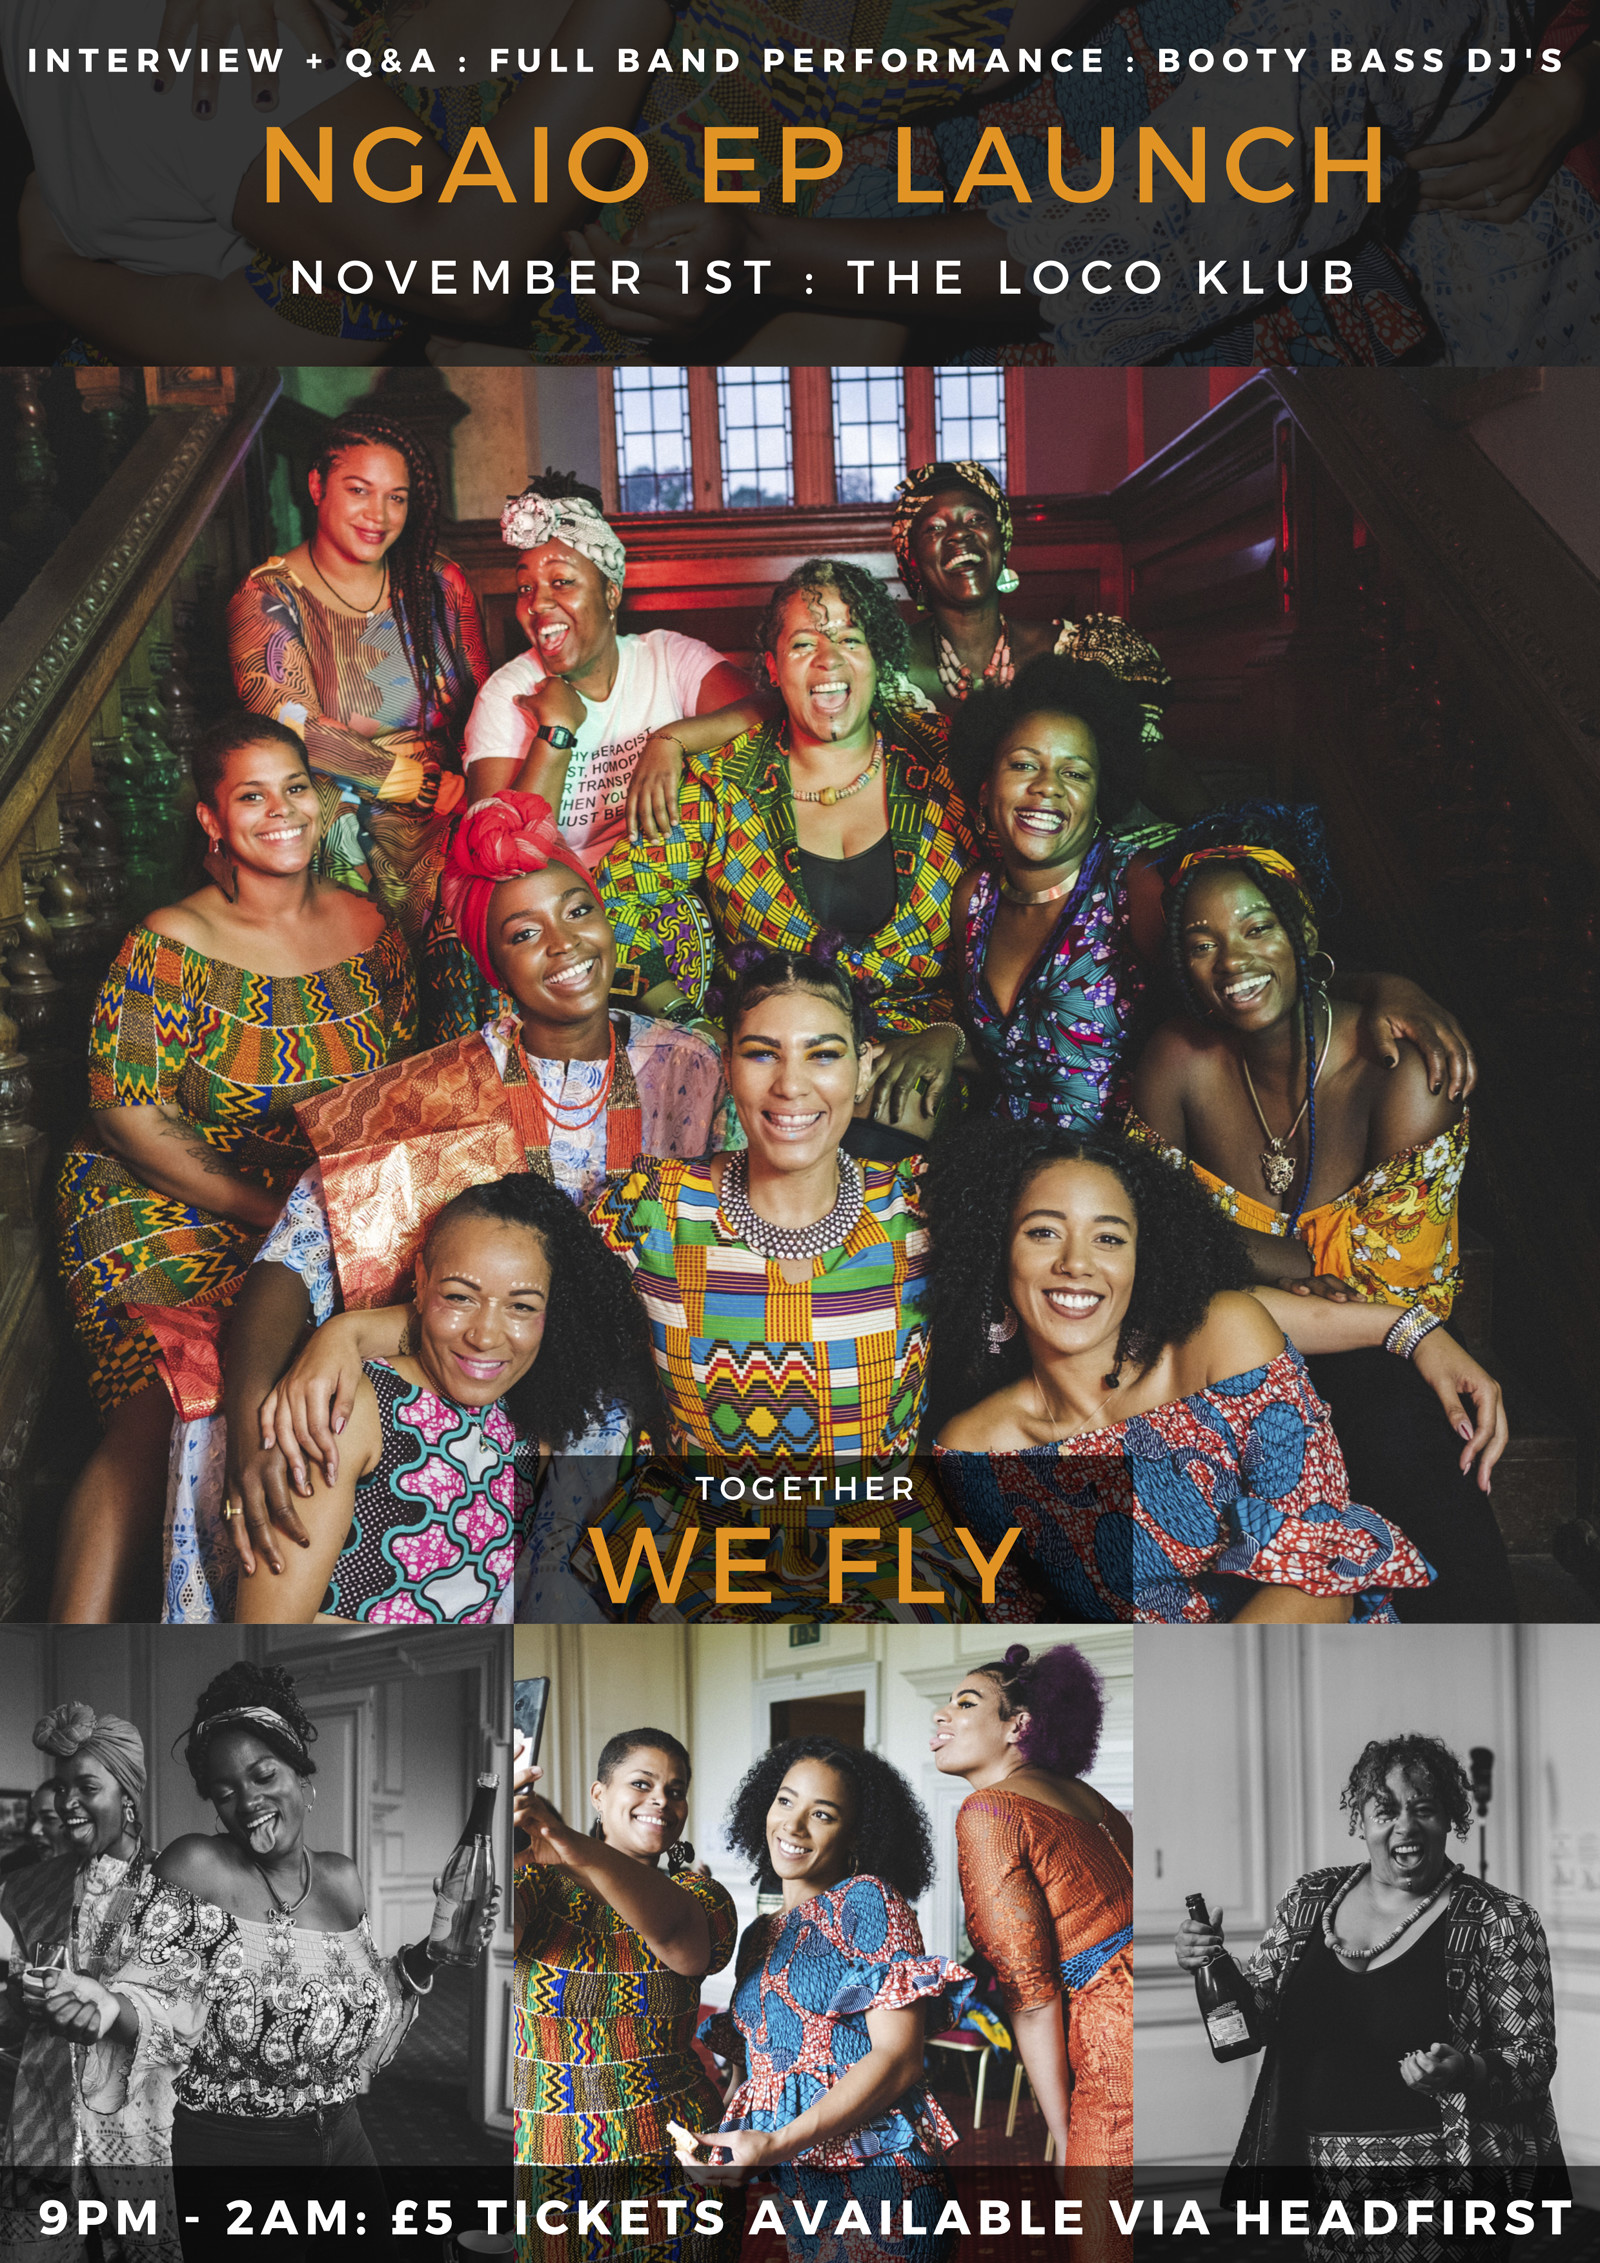 We Fly EP Launch at The Loco Klub